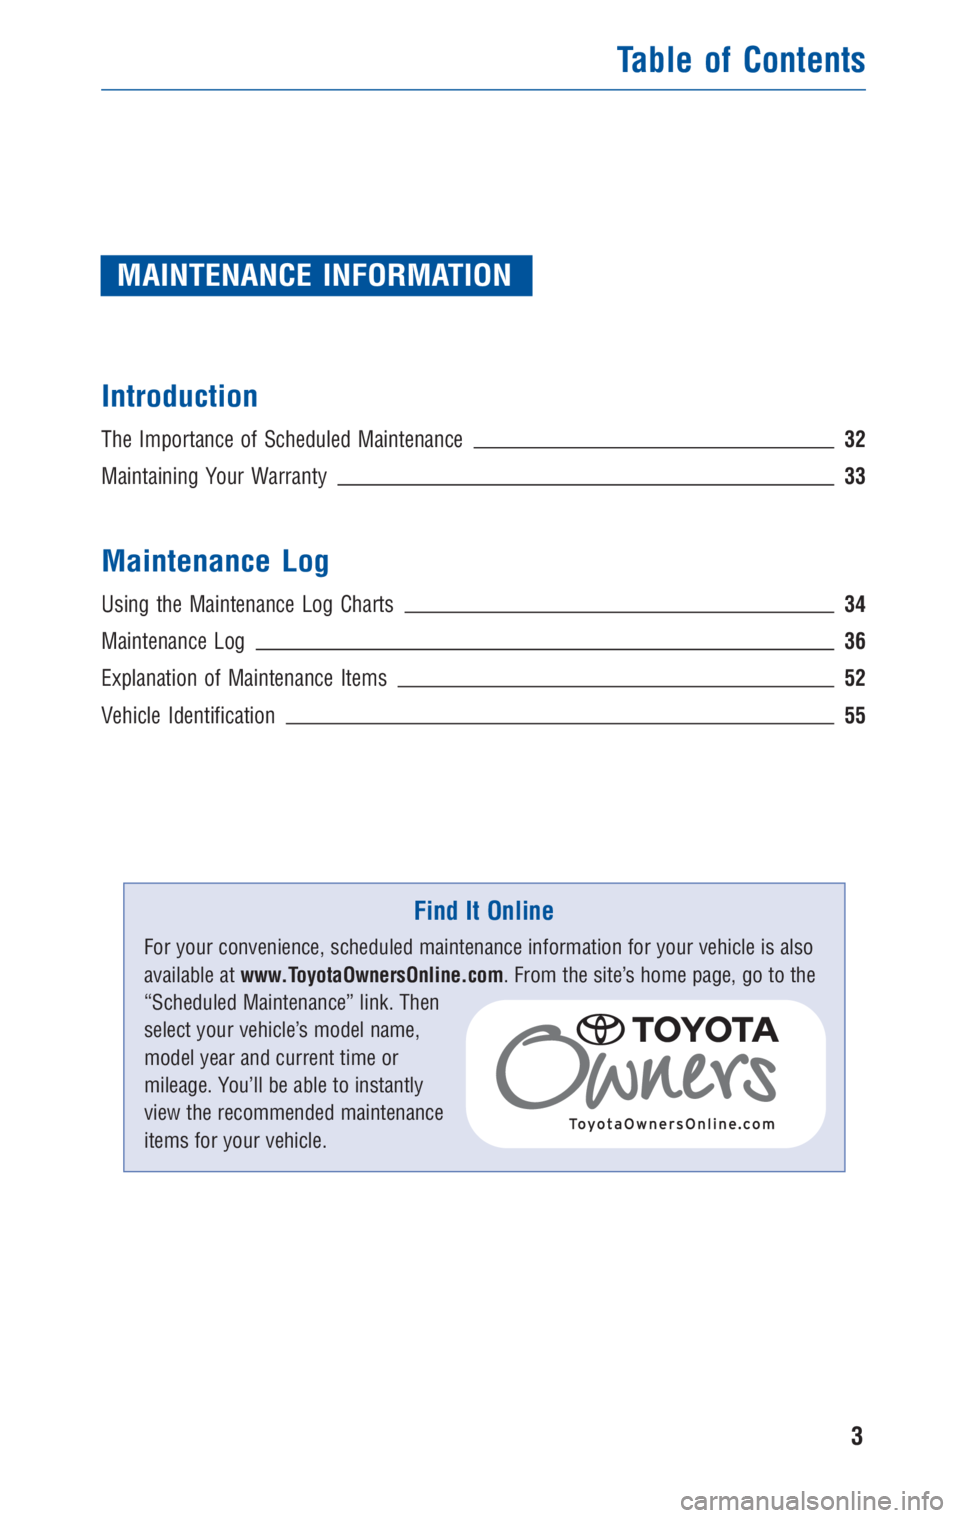 TOYOTA VENZA 2010  Warranties & Maintenance Guides (in English) MAINTENANCE INFORMATION
Introduction
The Importance of Scheduled Maintenance32
Maintaining Your Warranty33
Maintenance Log
Using the Maintenance Log Charts34
Maintenance Log36
Explanation of Maintenan